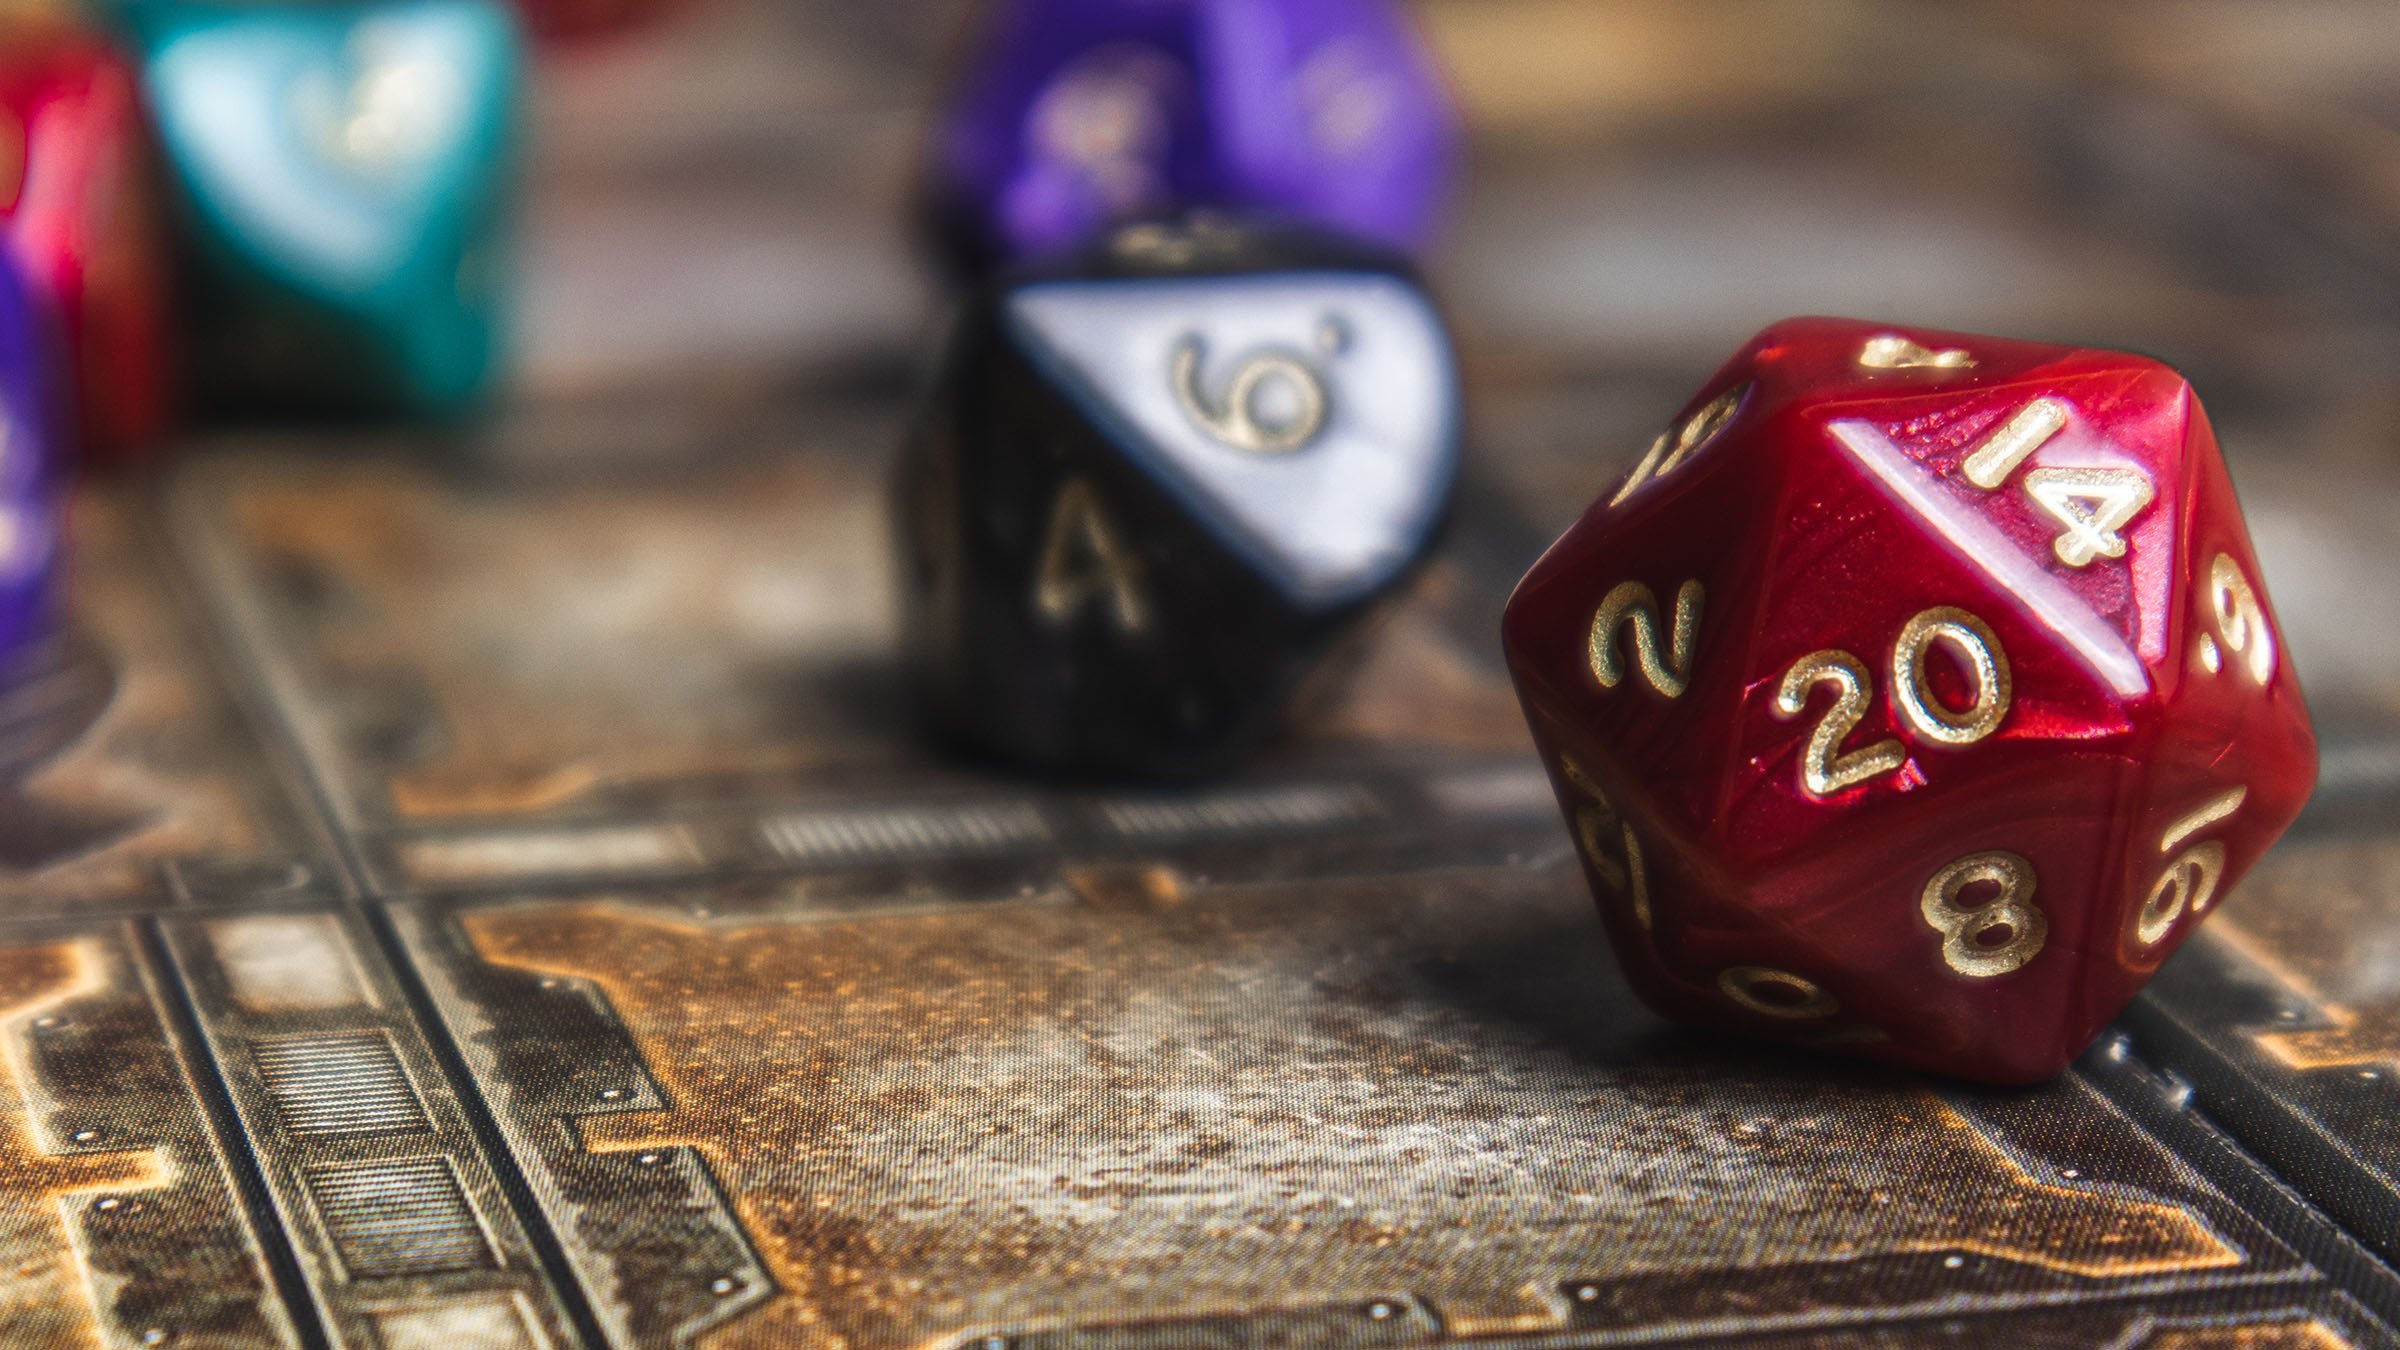 We rolled a 1': D&D publisher addresses backlash over controversial license